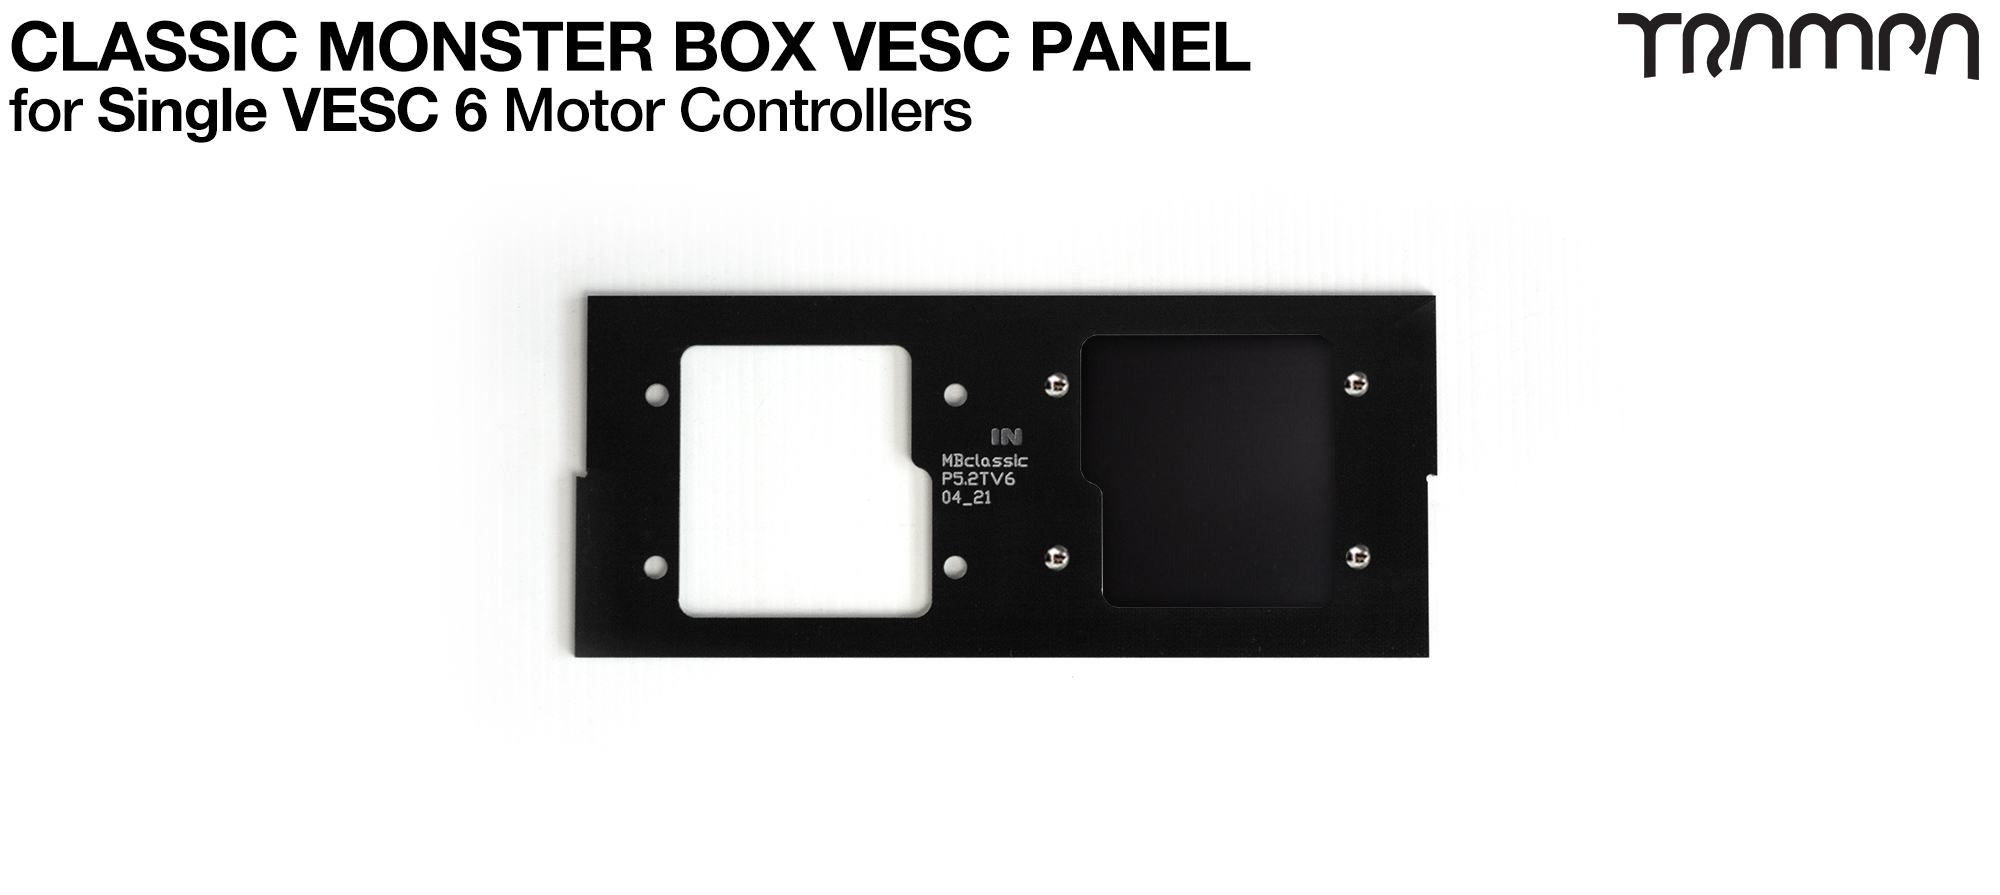 CLASSIC Monster Box - Panel to fit 1x VESC 6 